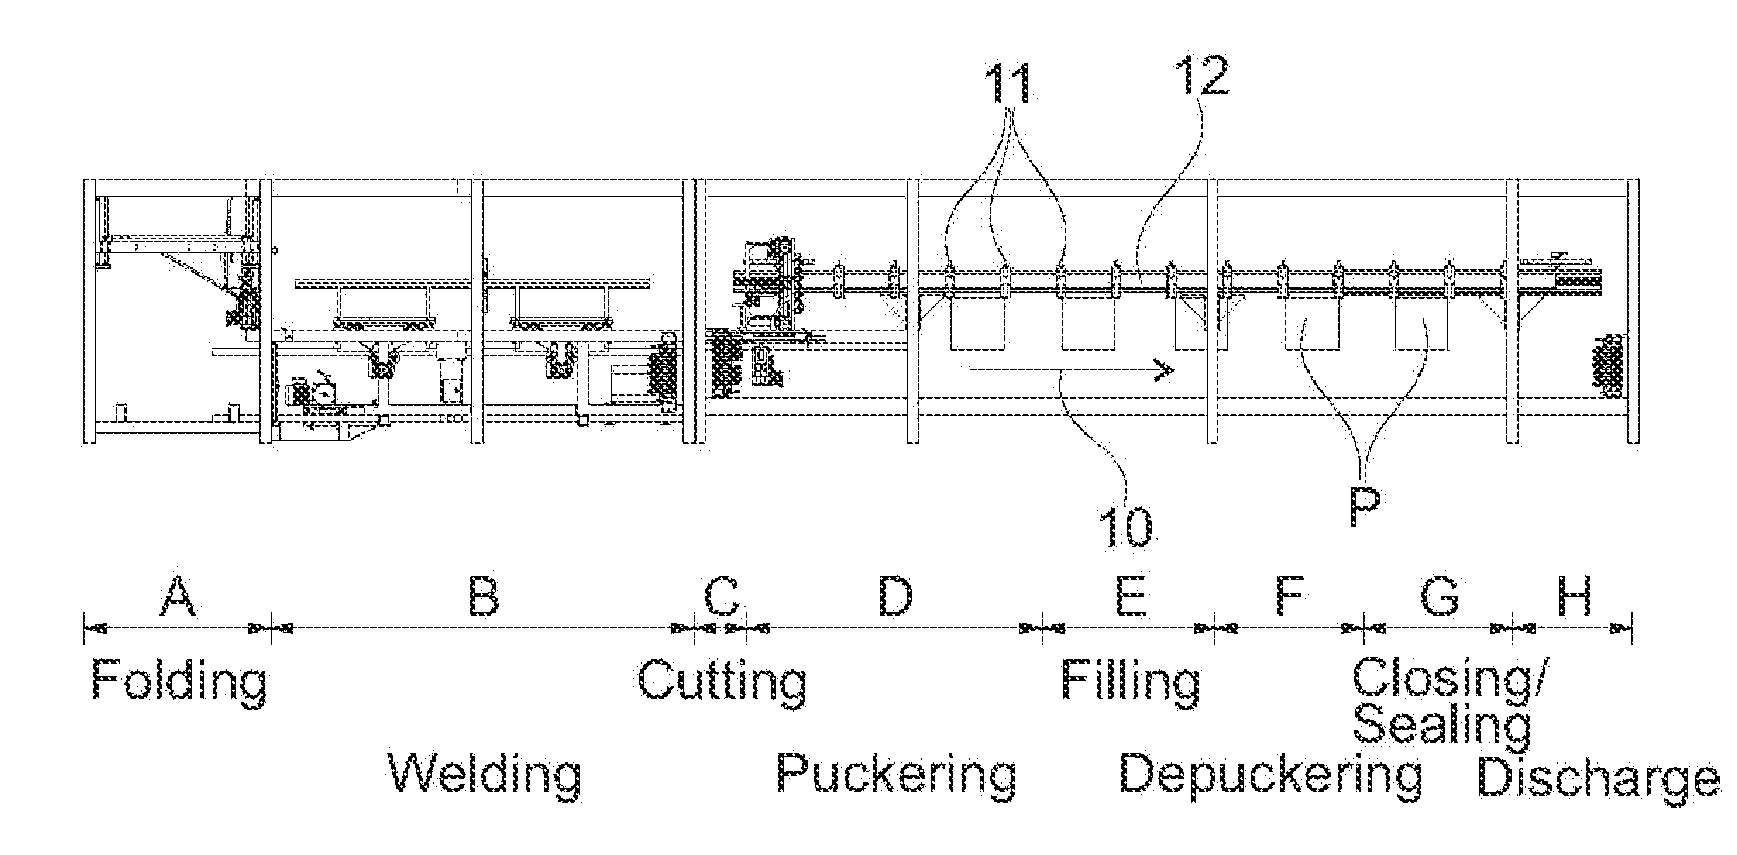 Apparatus for making, handling, and filling pouches